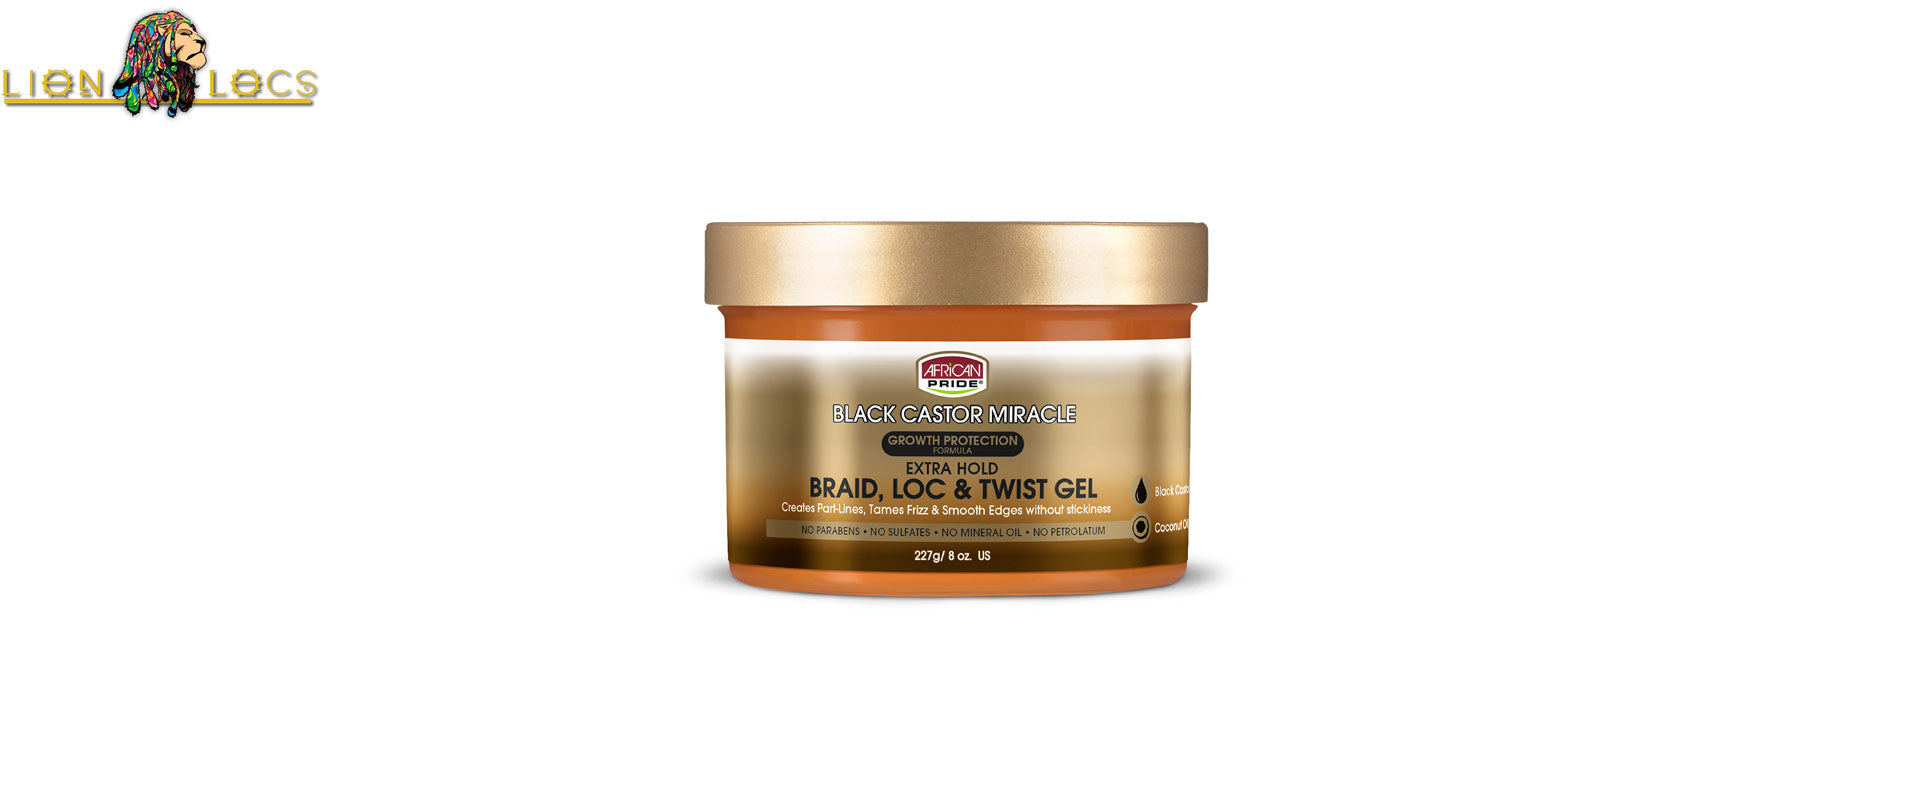 Black Castor Miracle Extra Hold Braid Loc Twist Gel review